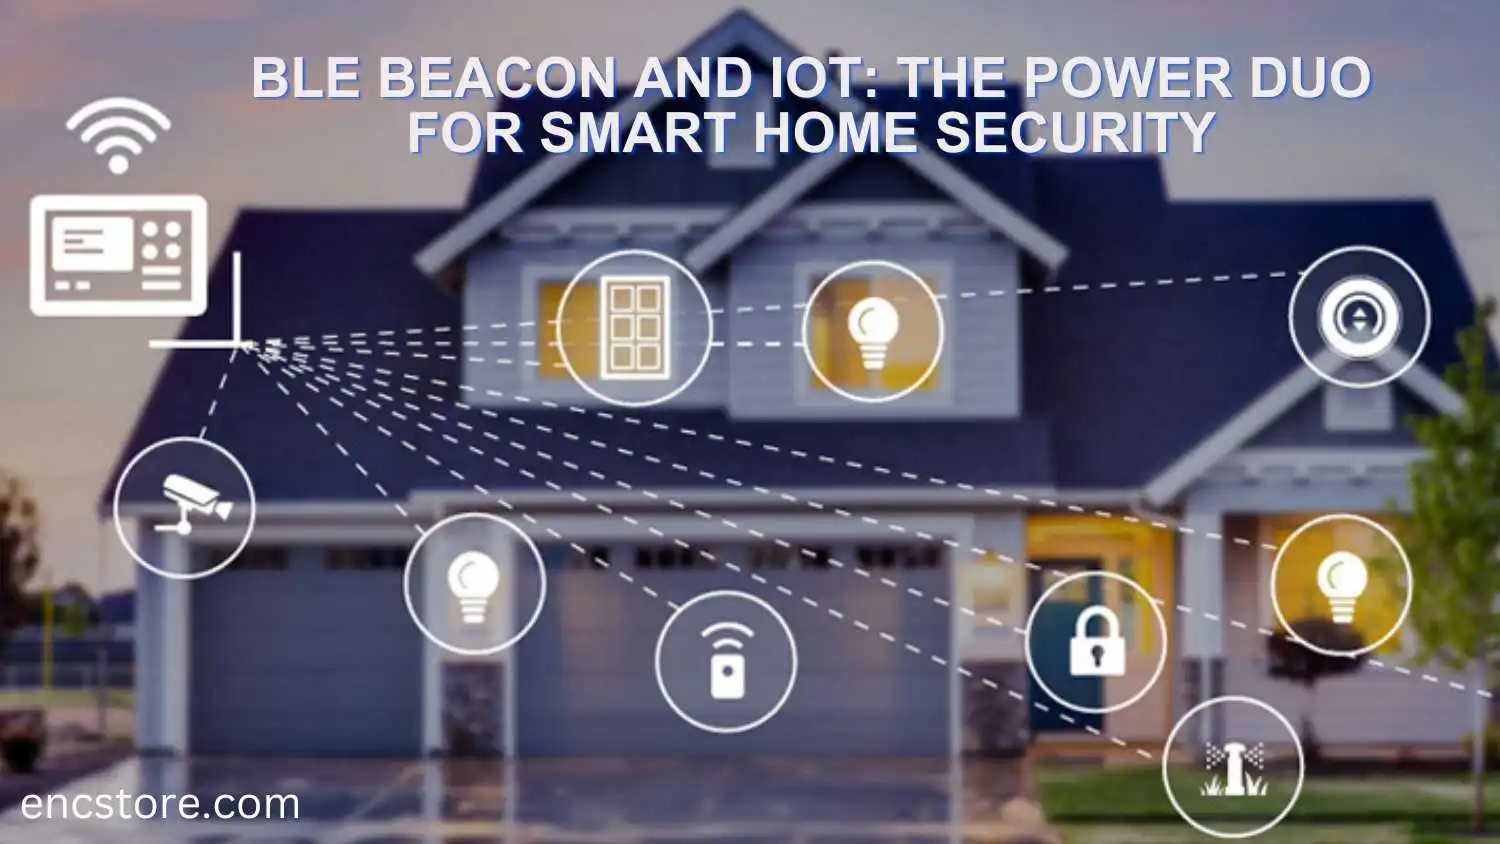 BLE Beacon and IoT for Smart Home Security